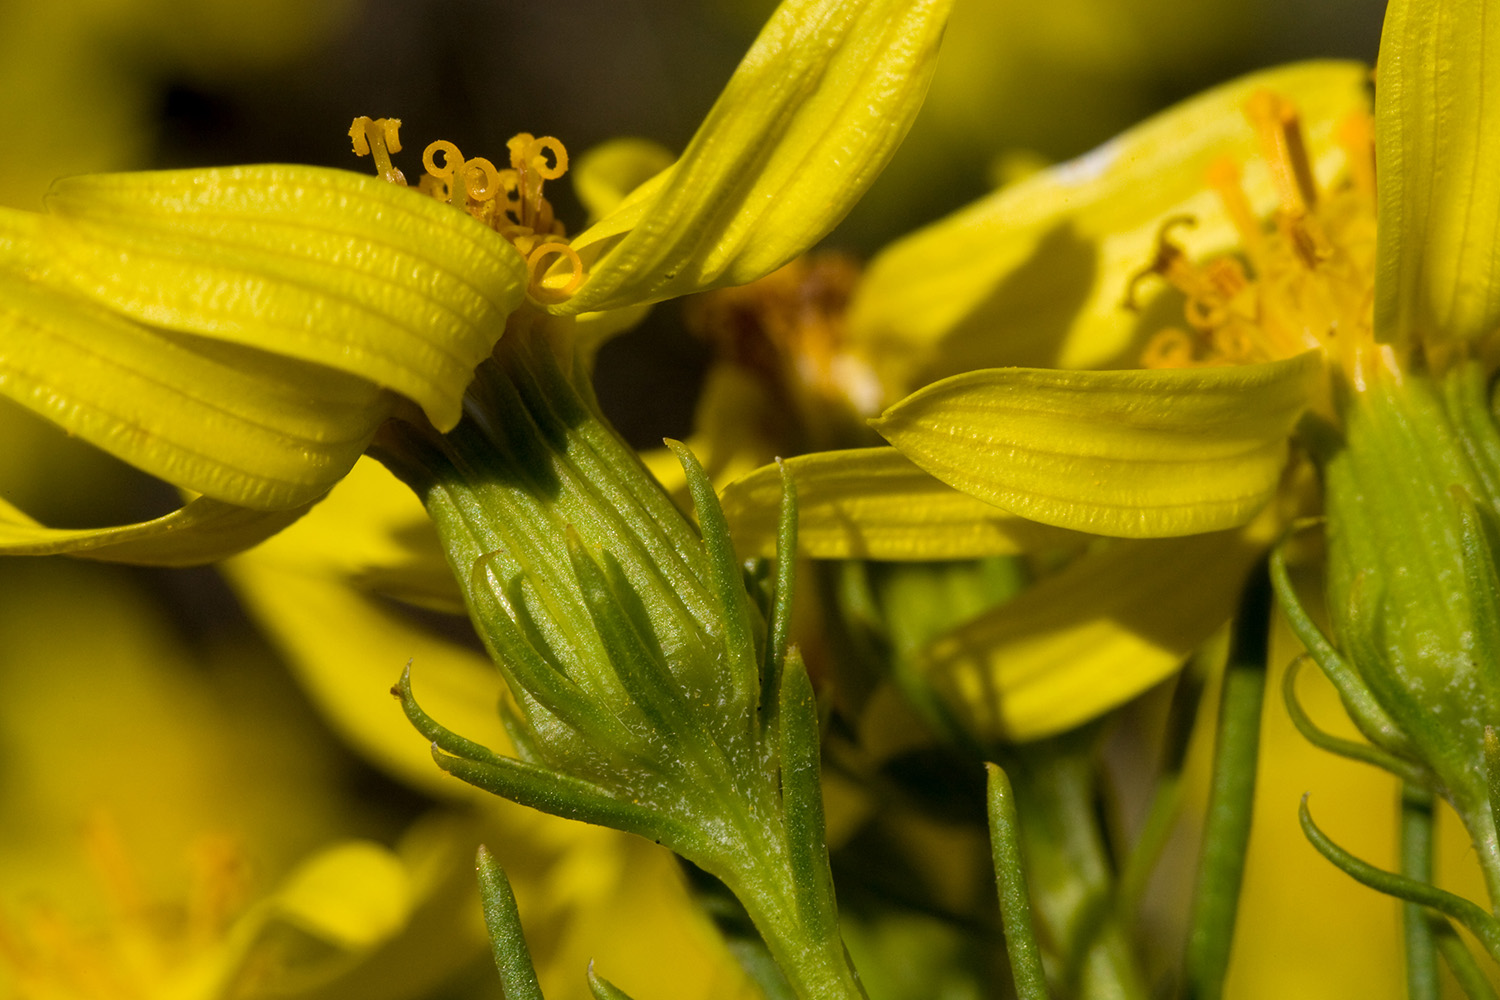 Close-up of the side of a Senecio warnockii flower showing the way the involucre (bracts) come up over the base of the flower